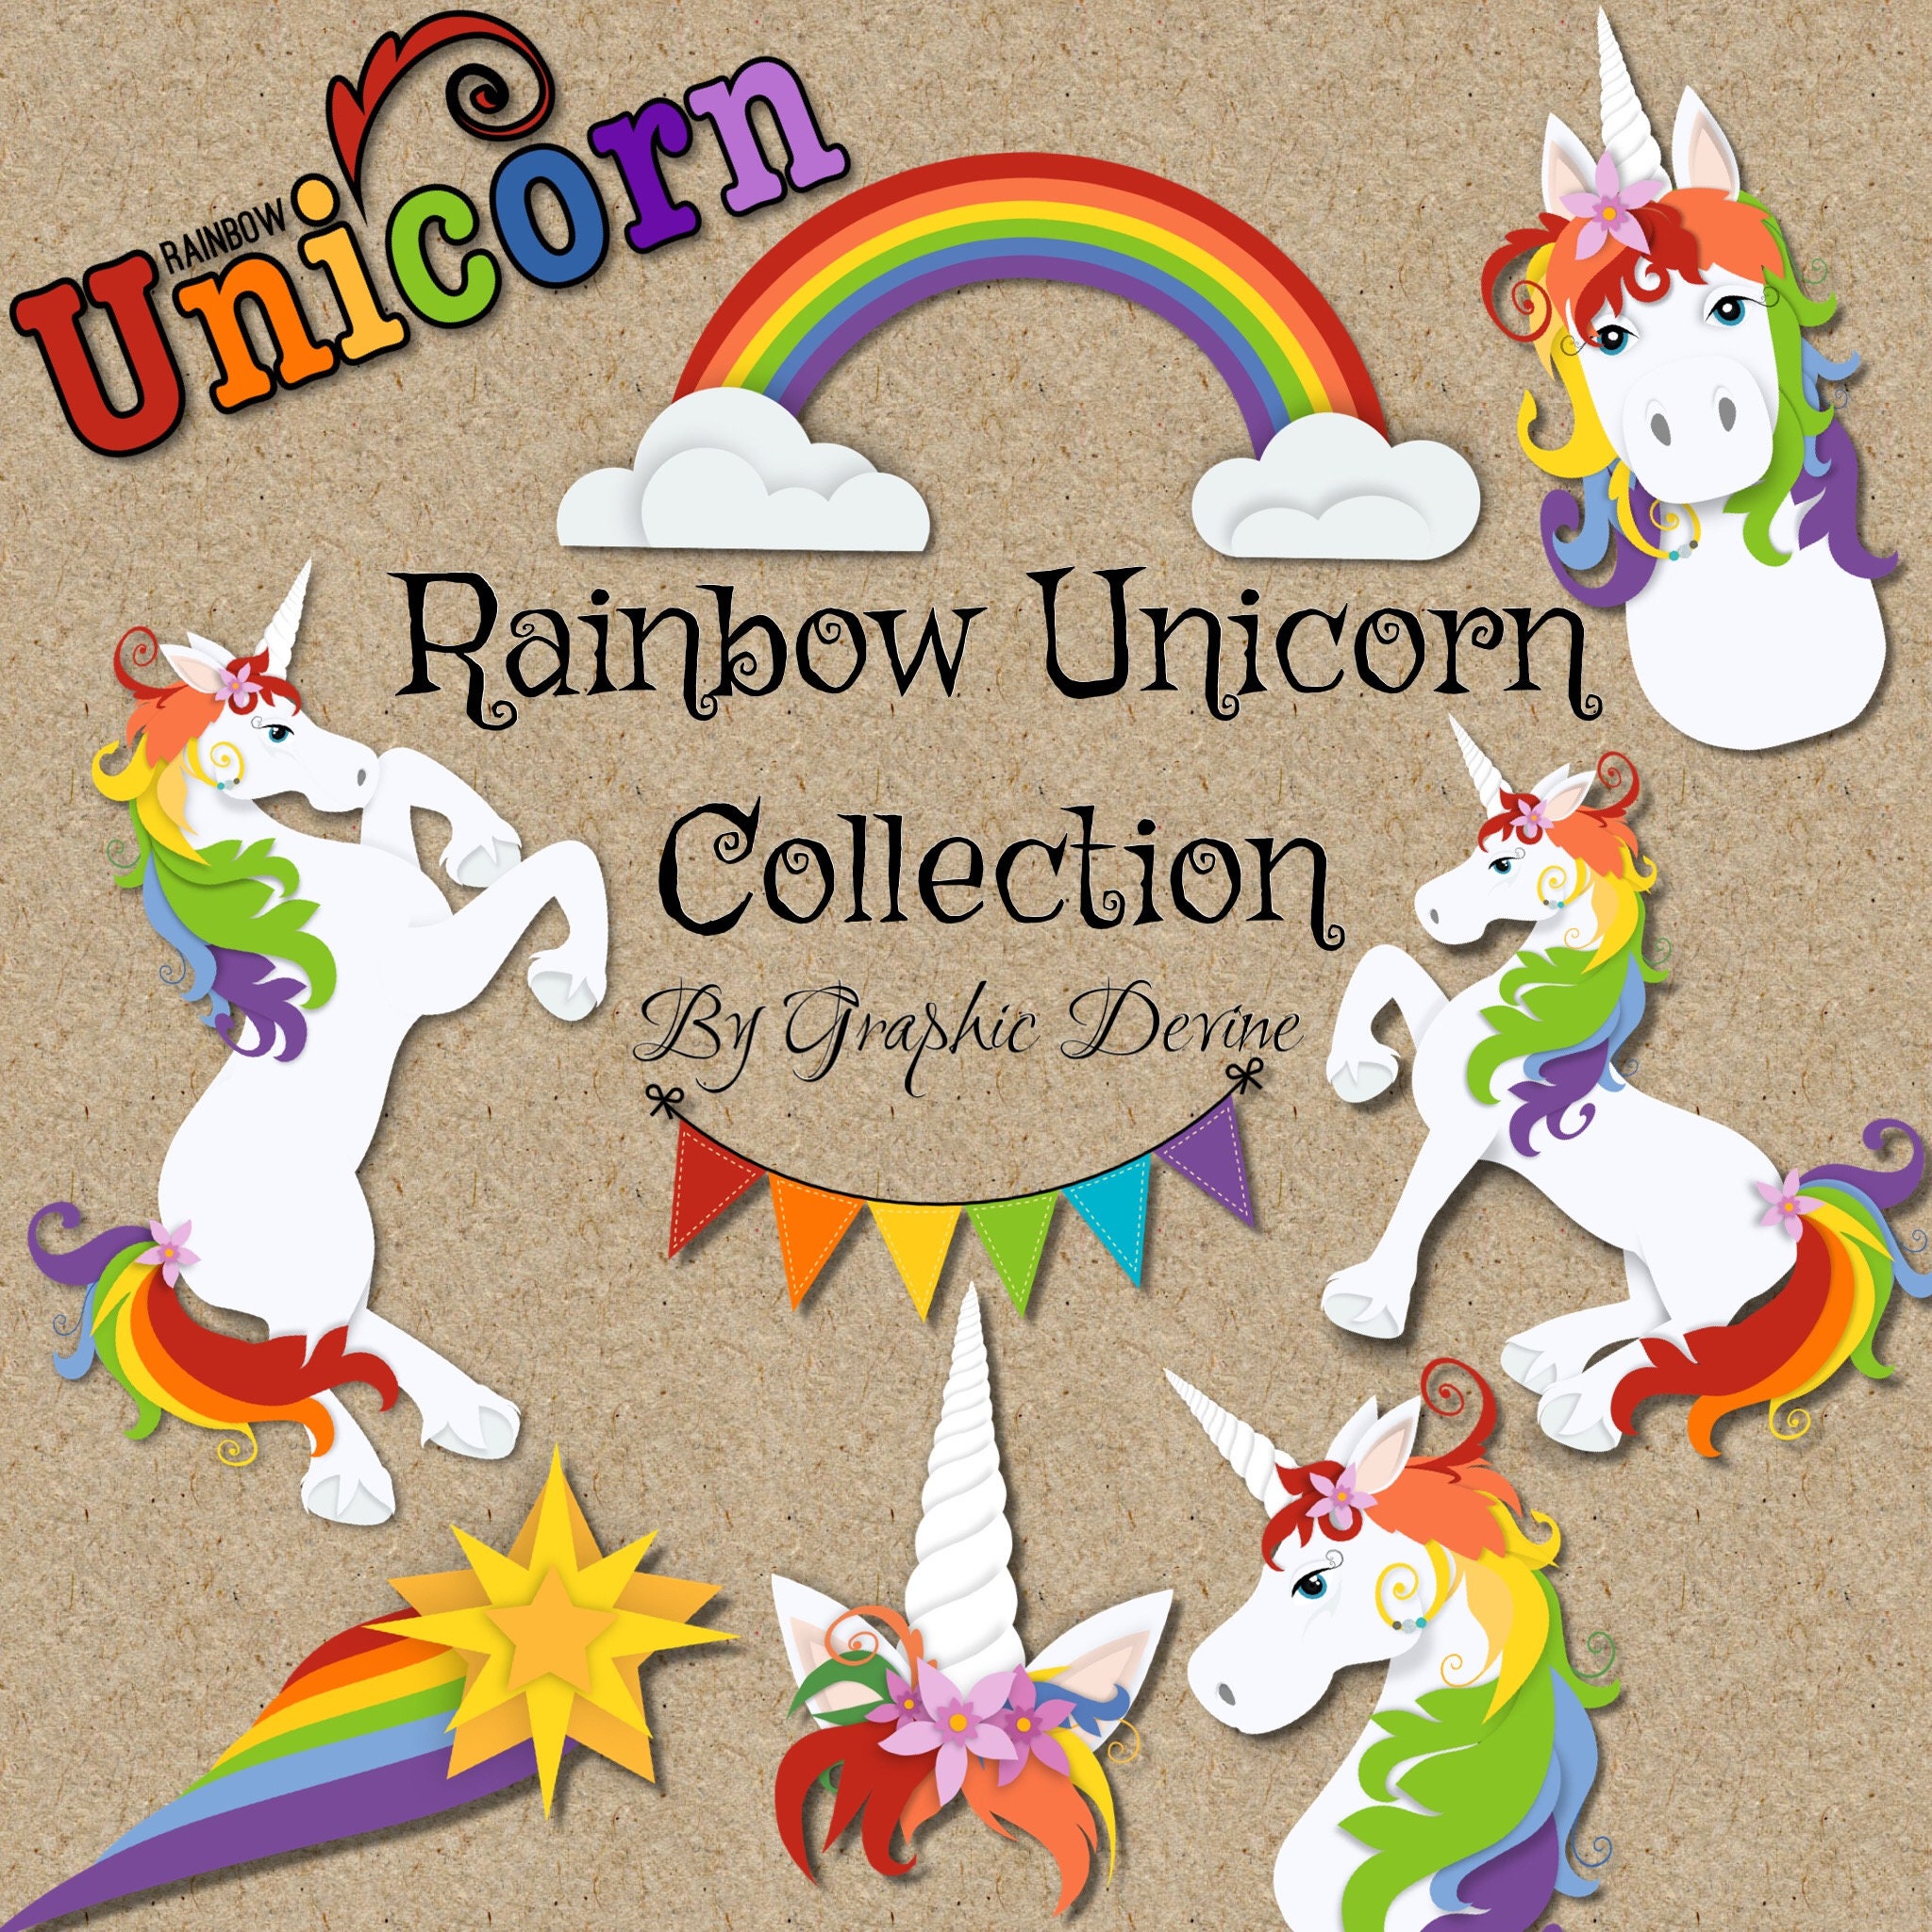 Rainbow Unicorn Clipart Images By Graphic Devine Etsy